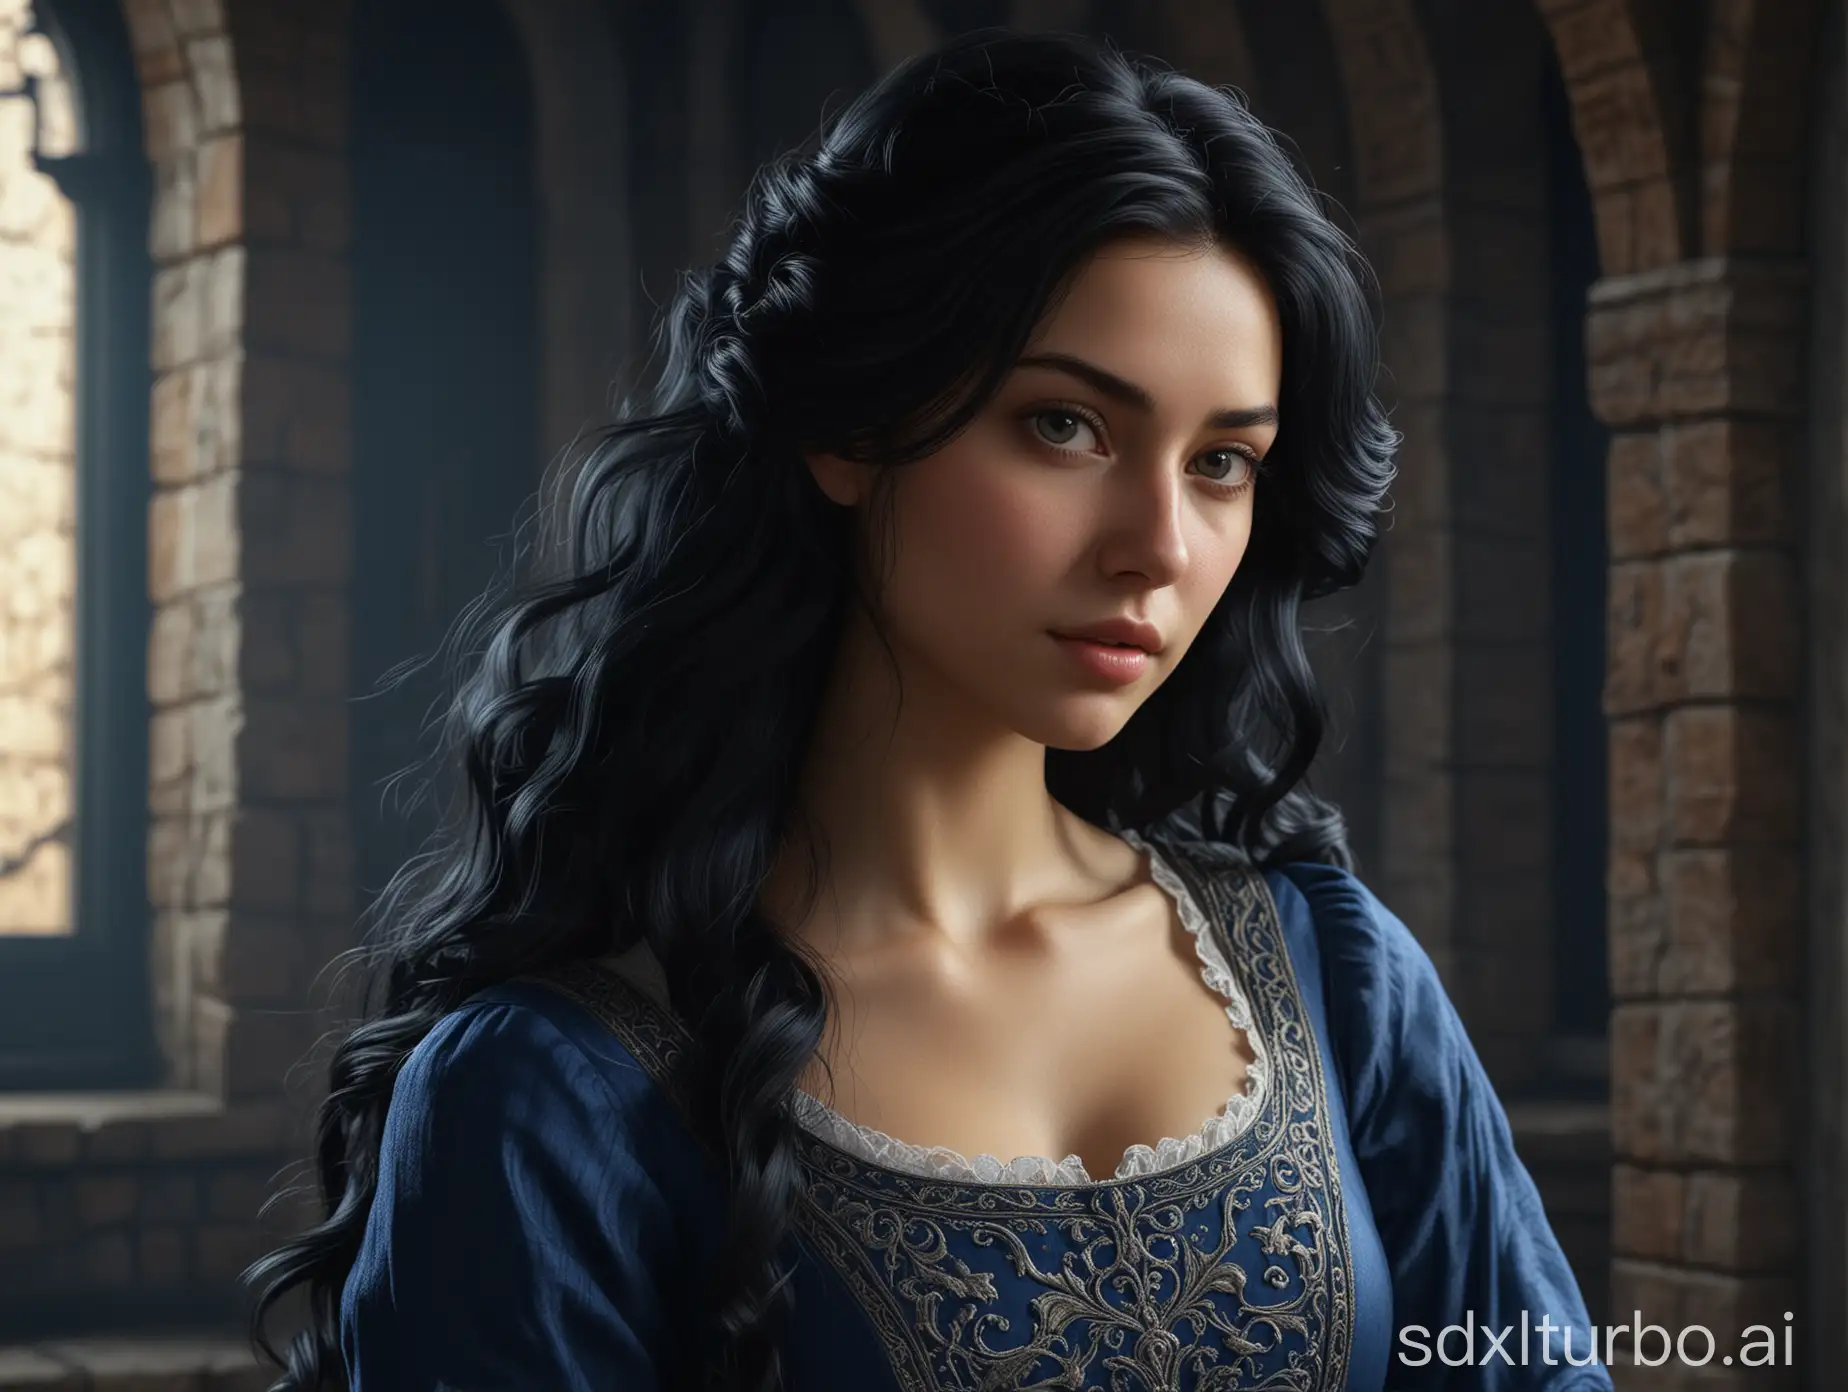 Hyperrealistic-Portrait-of-a-Medieval-Beauty-with-Long-Black-Hair-in-Blue-Dress